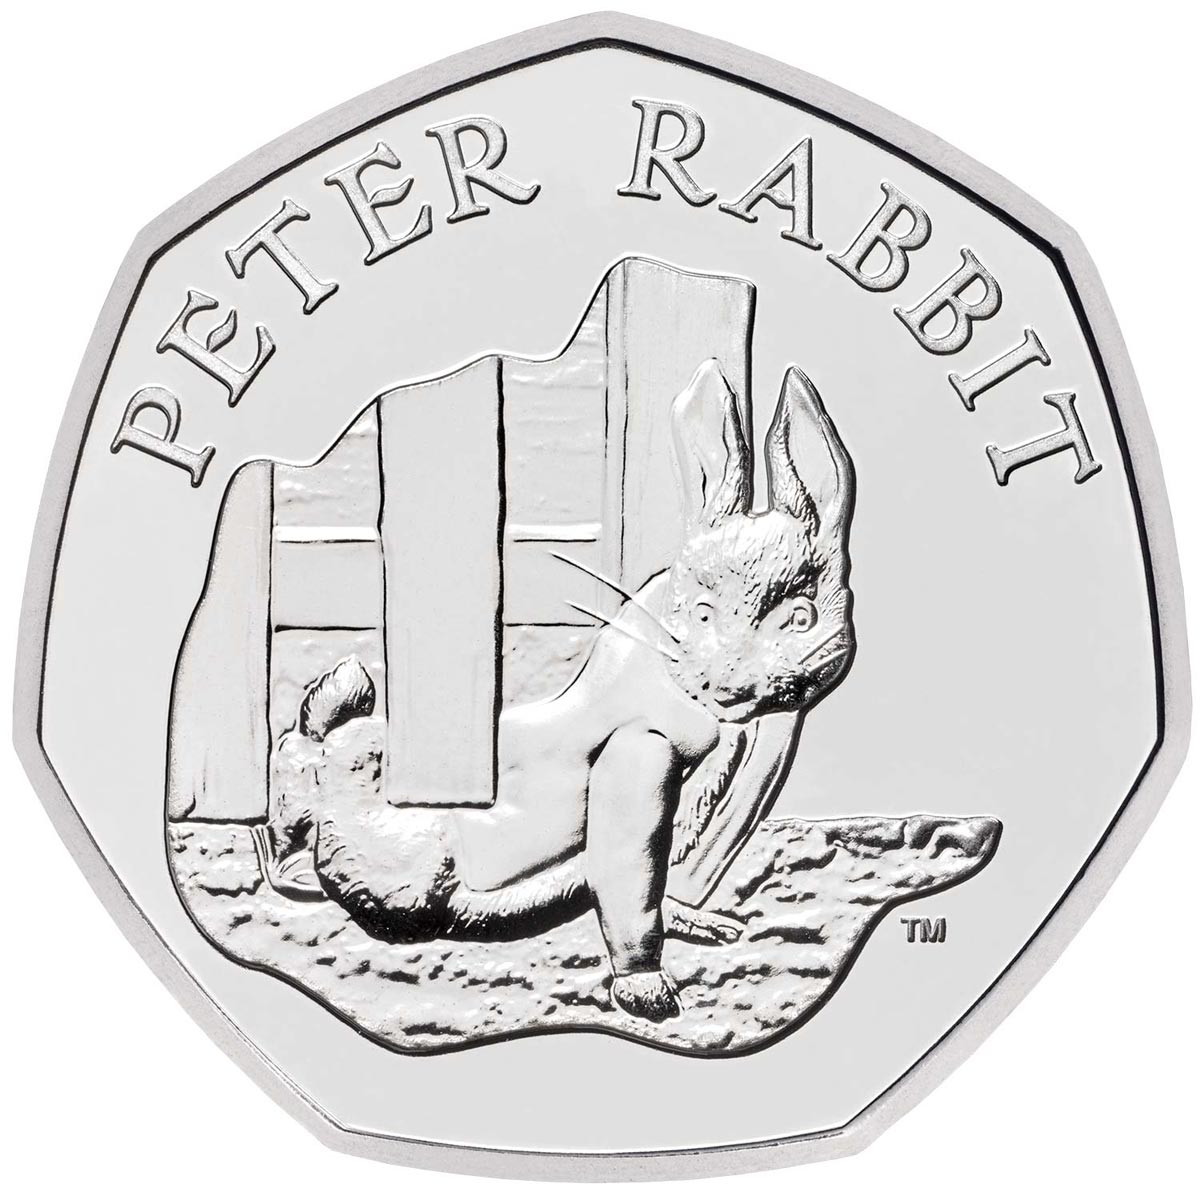 Image of 50 pence coin - Peter Rabbit | United Kingdom 2020